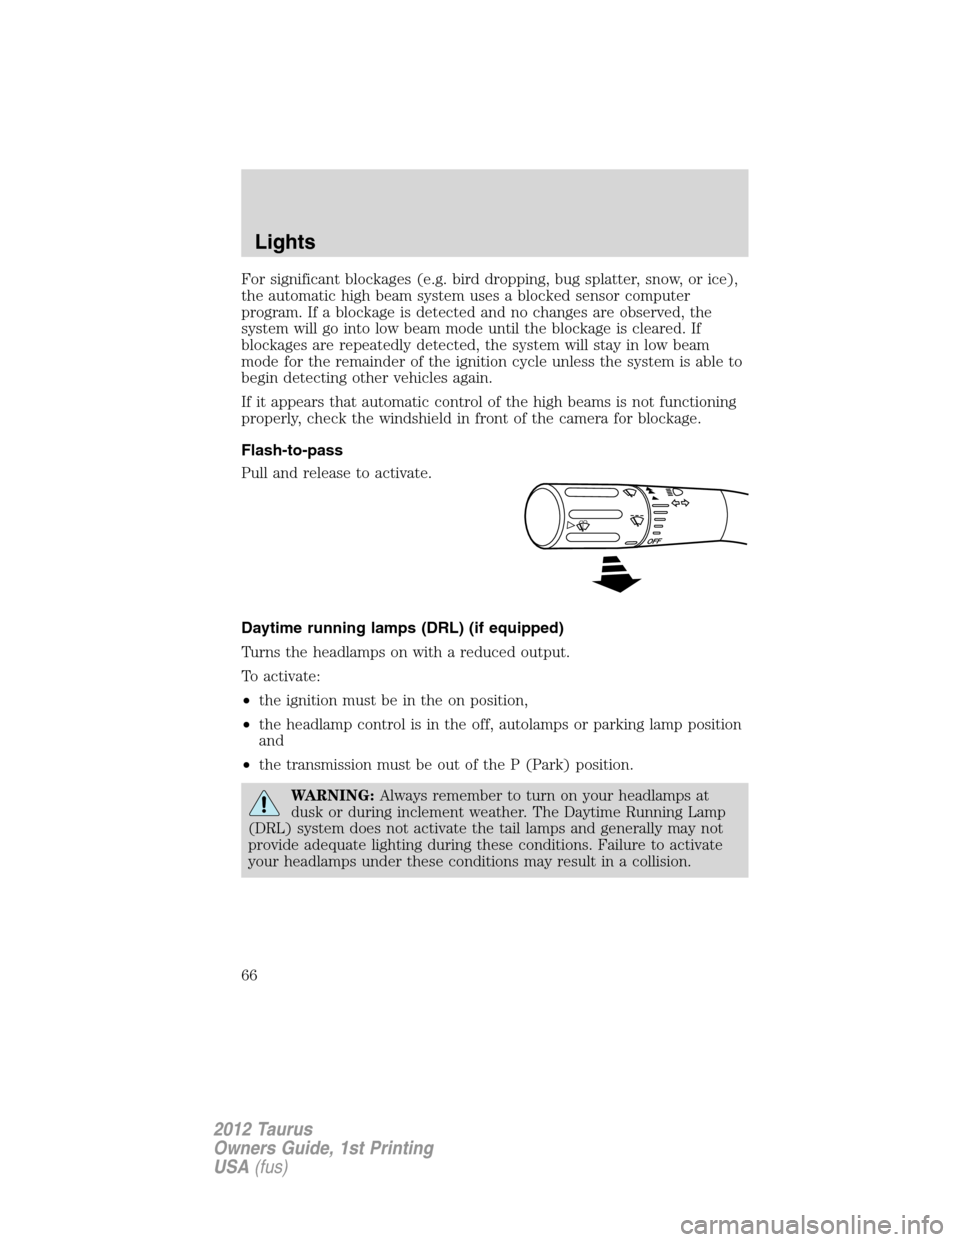 FORD TAURUS 2012 6.G User Guide For significant blockages (e.g. bird dropping, bug splatter, snow, or ice),
the automatic high beam system uses a blocked sensor computer
program. If a blockage is detected and no changes are observed